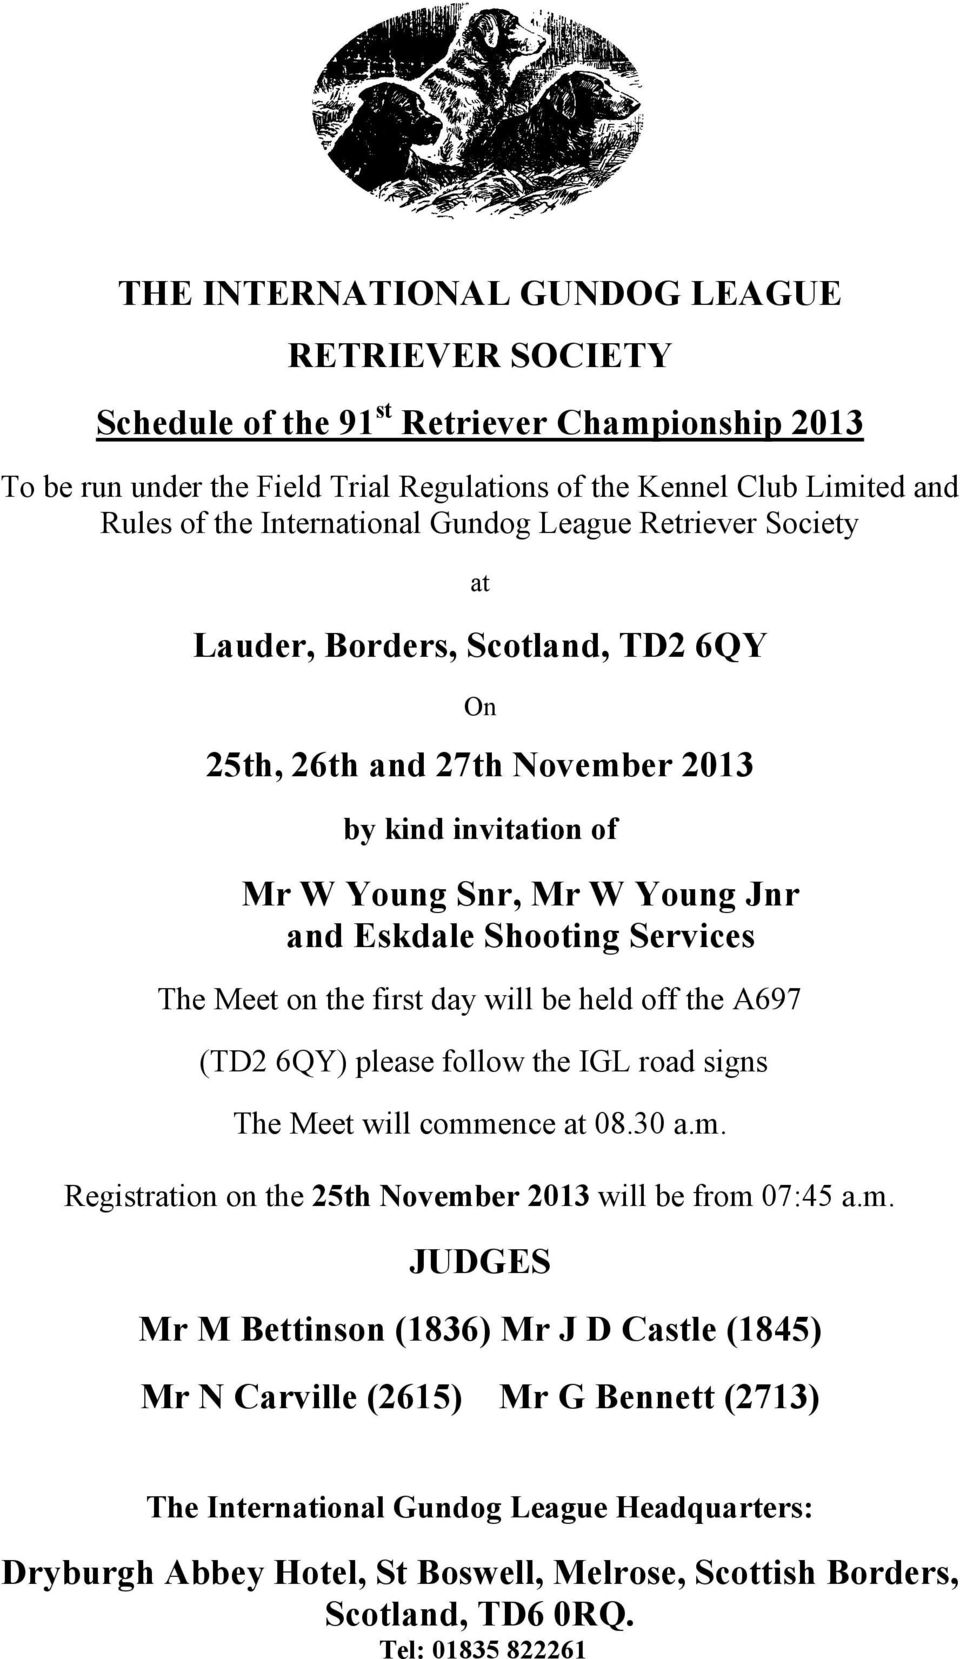 Services The Meet on the first day will be held off the A697 (TD2 6QY) please follow the IGL road signs The Meet will commence at 08.30 a.m. Registration on the 25th November 2013 will be from 07:45 a.